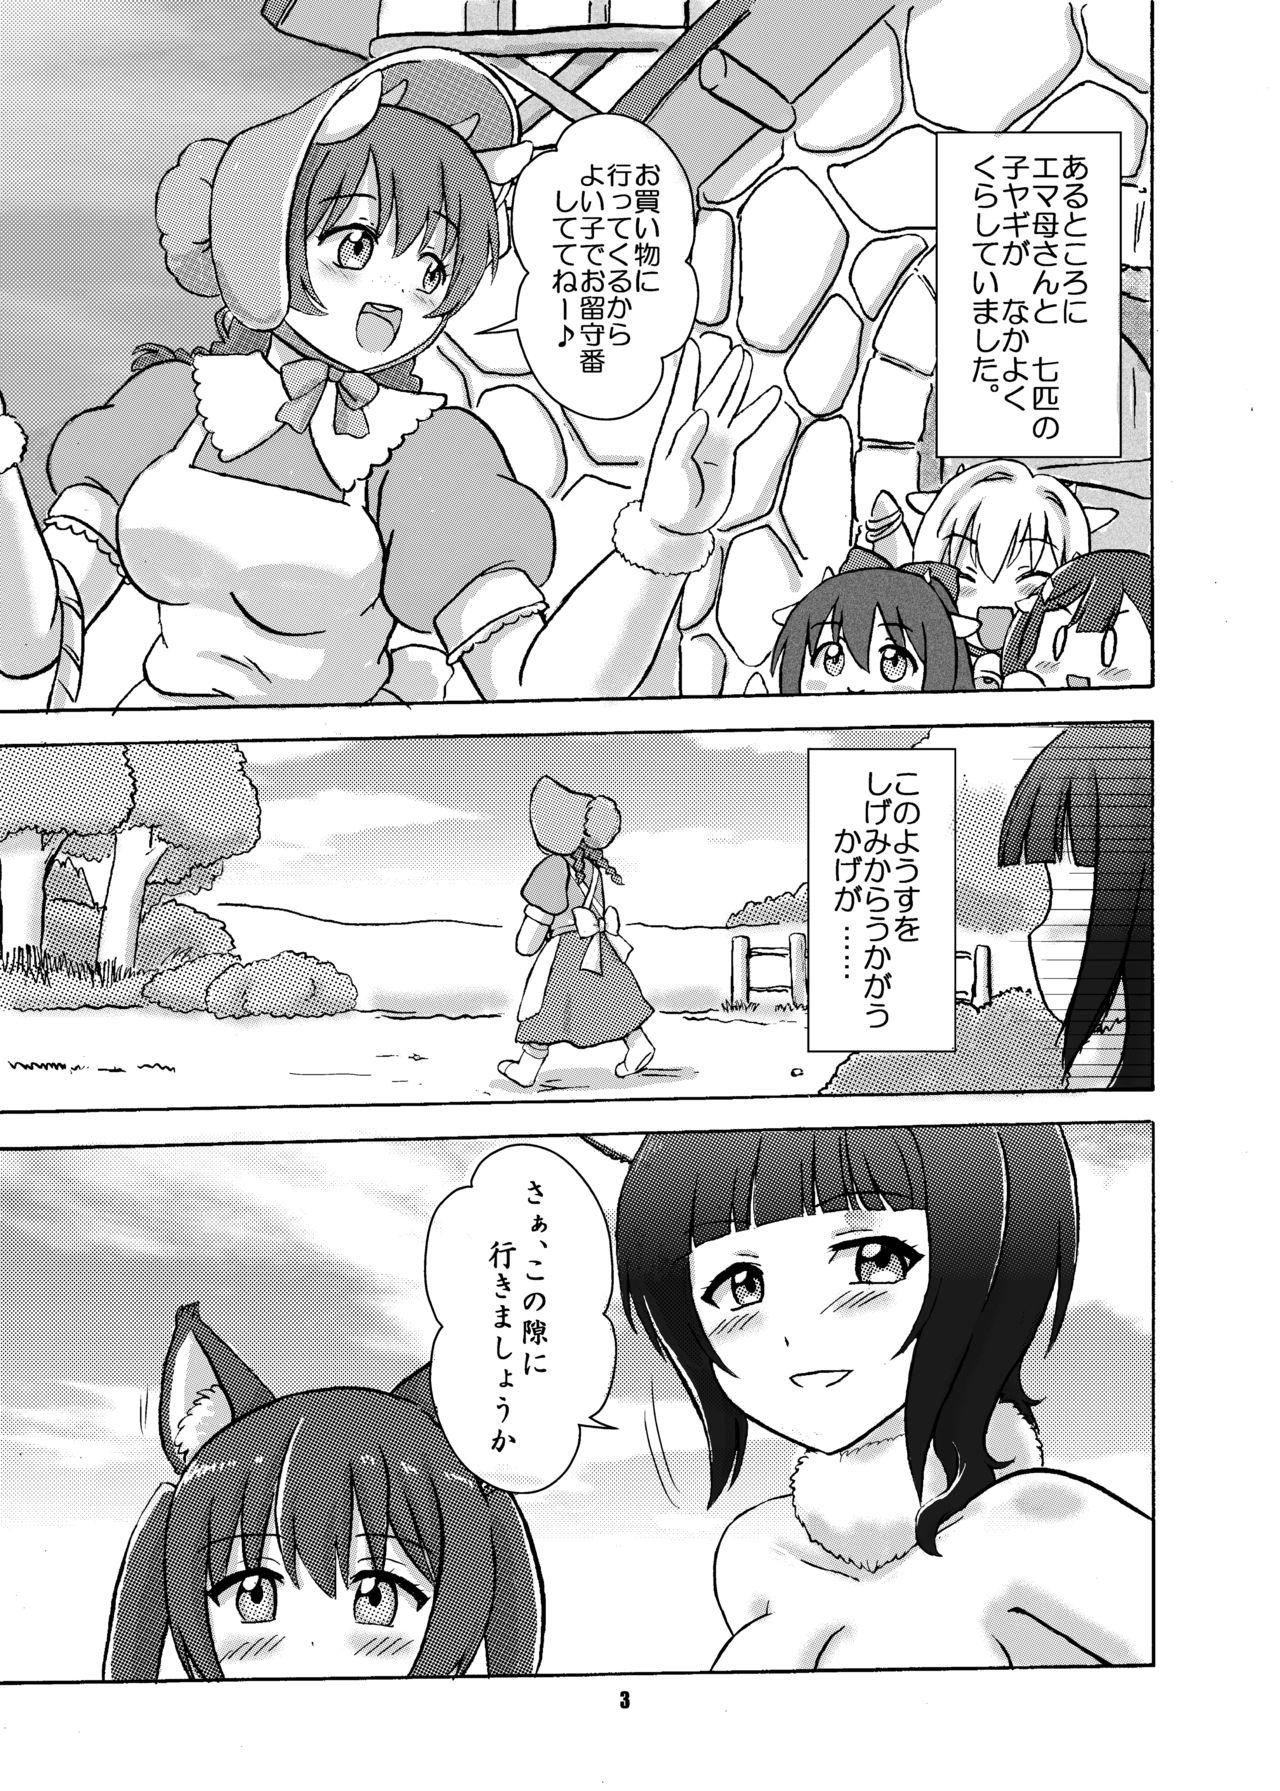 Flaquita Wolf and Seven Goats - Love live White Girl - Page 2